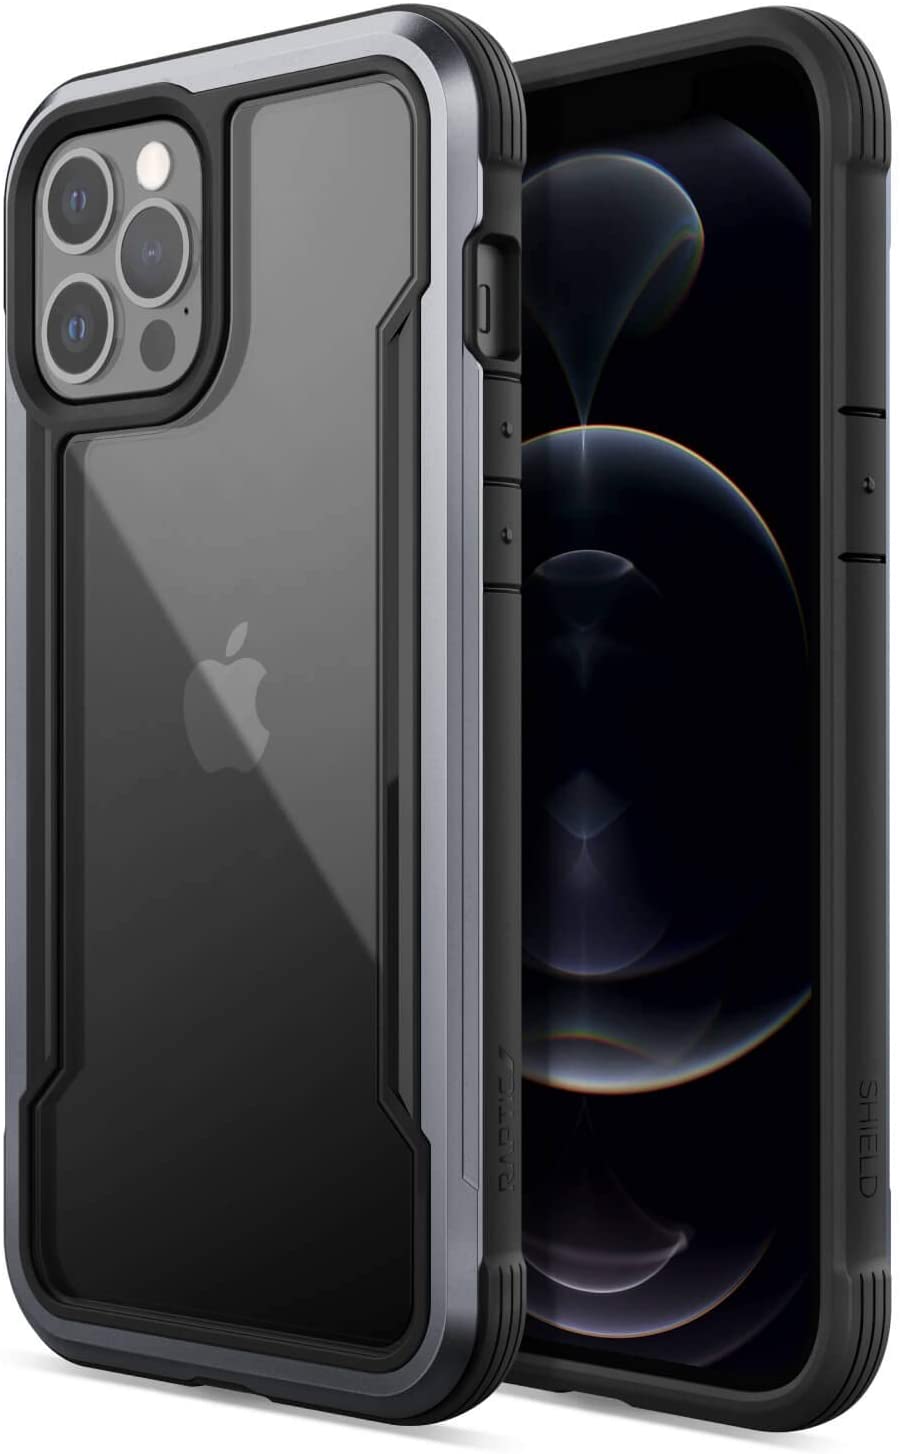 X-Doria Defense Raptic Shield iPhone 12 / Pro / Pro Max Shock Absorbing Protection, Durable Aluminum Frame, 10ft Drop Tested Case